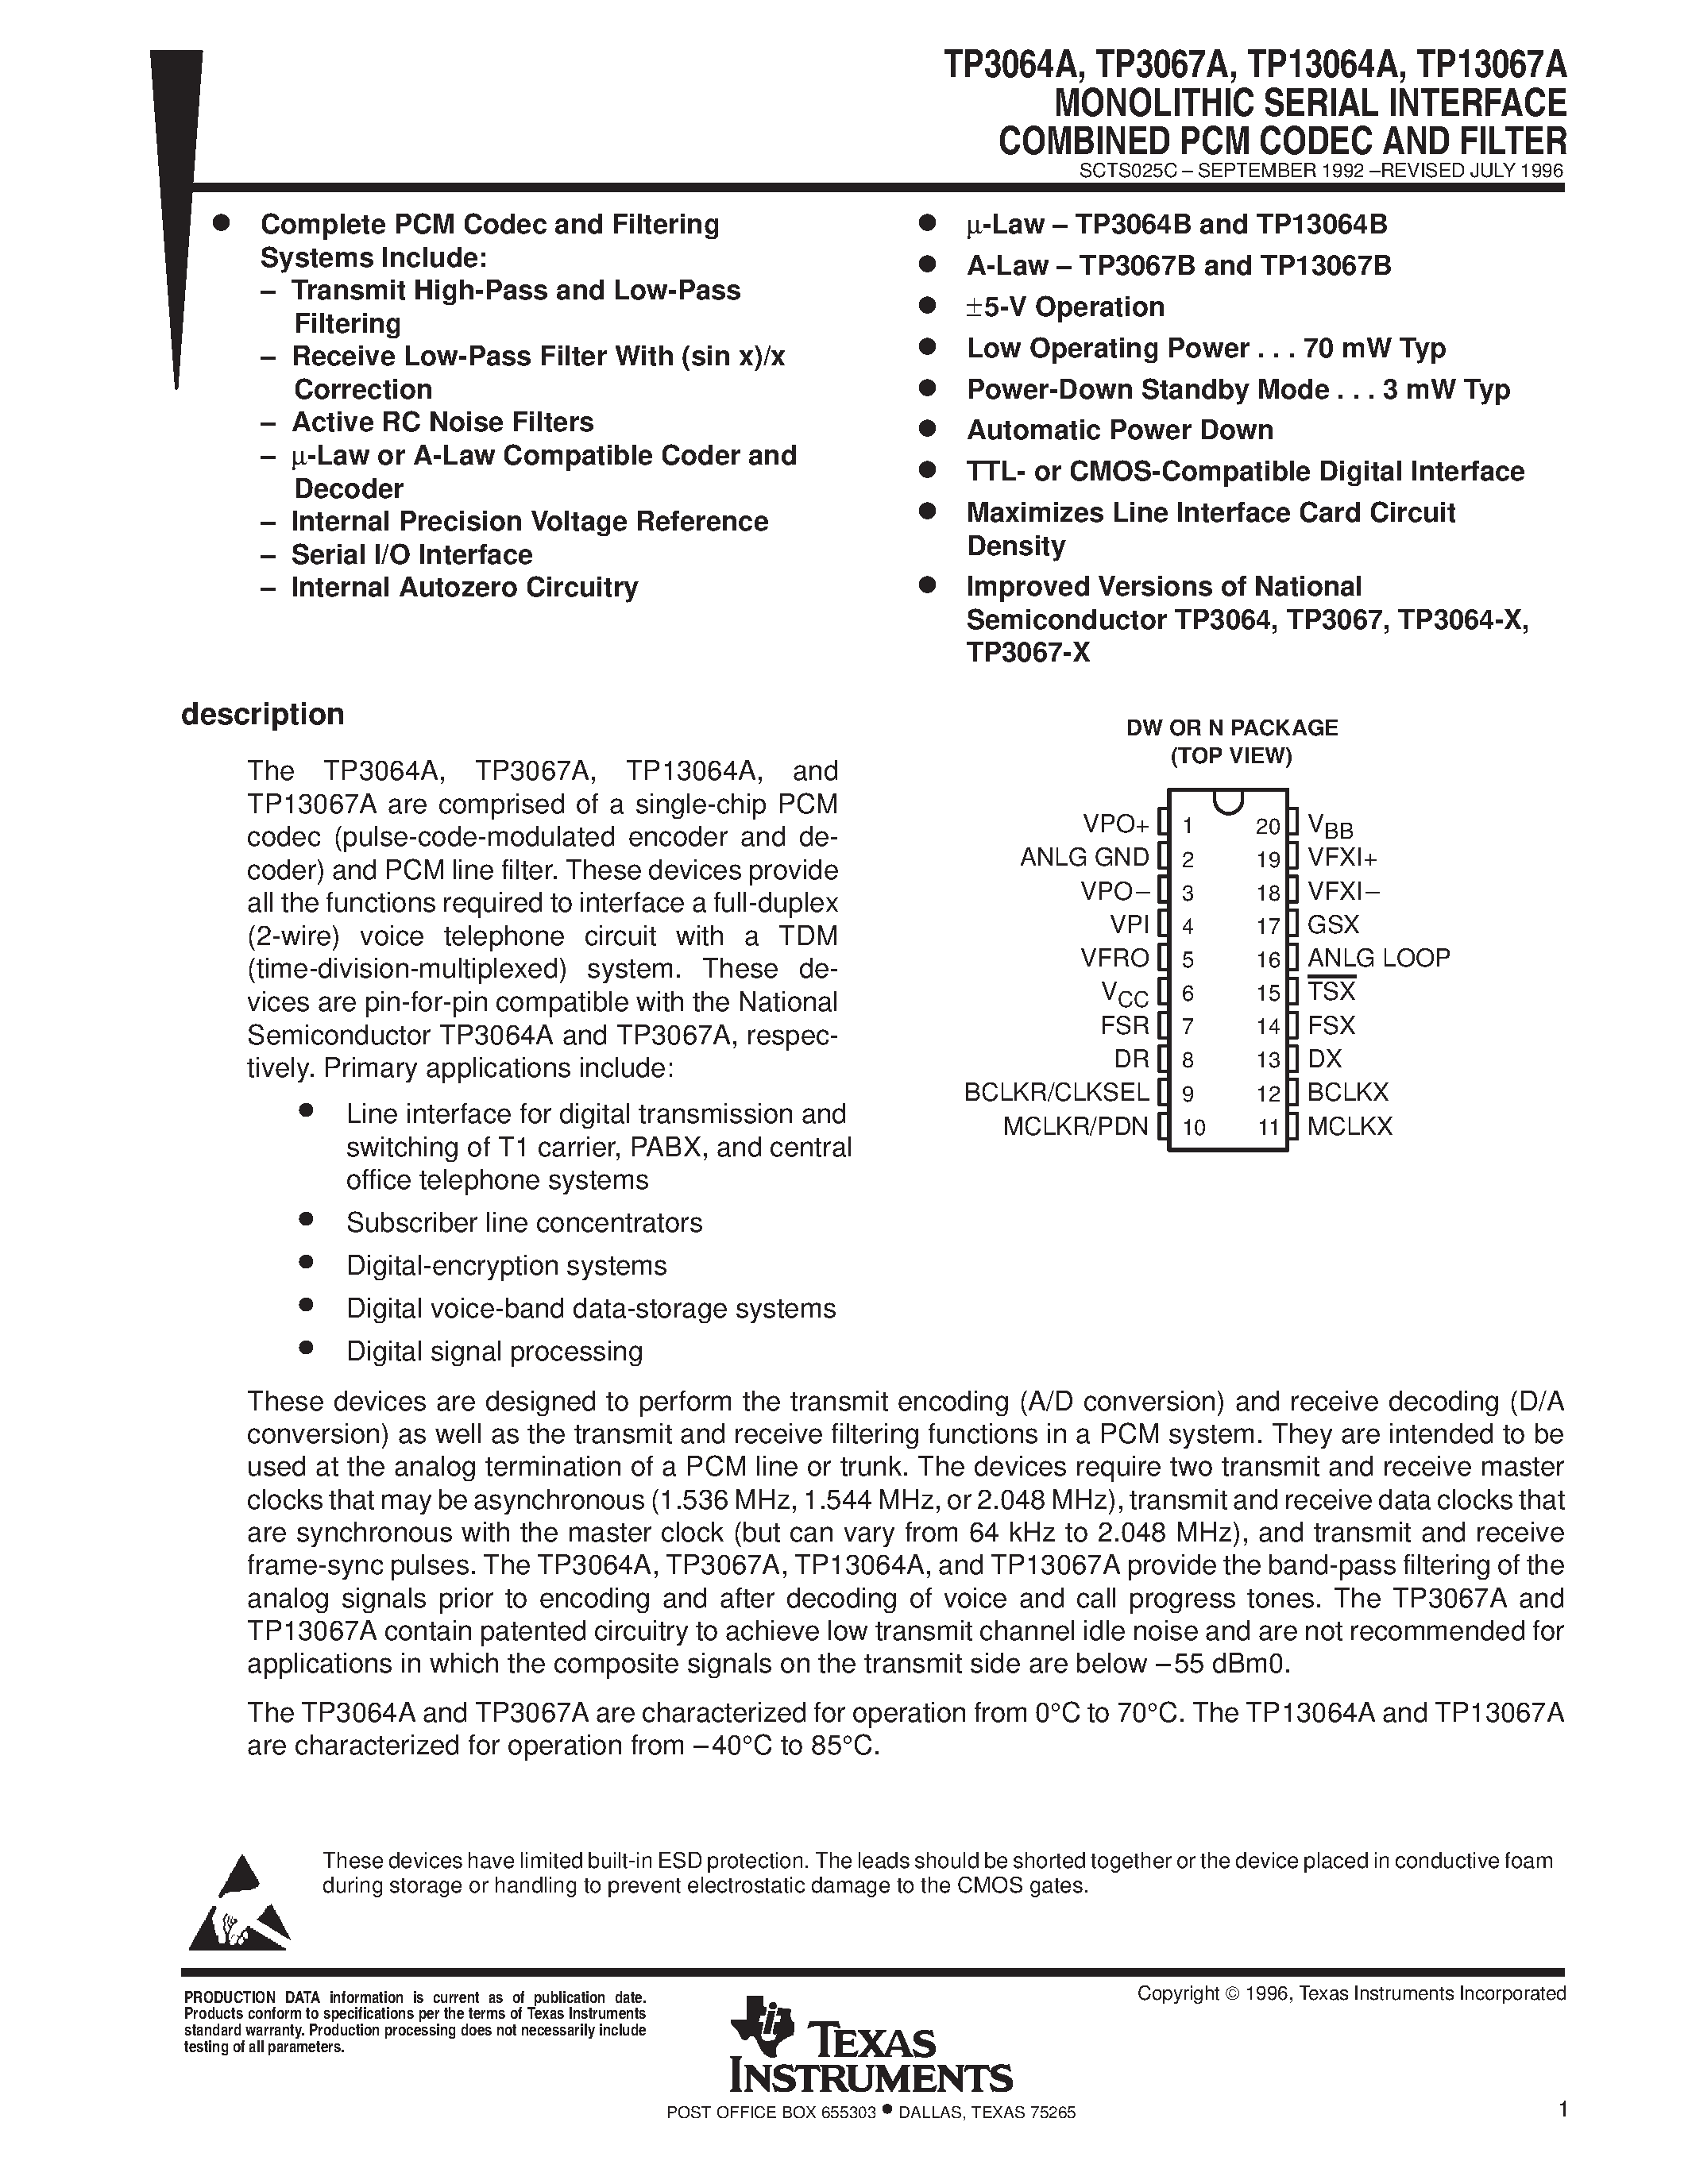 Datasheet TP13067A - MONOLITHIC SERIAL INTERFACE COMBINED PCM CODEC AND FILTER page 1